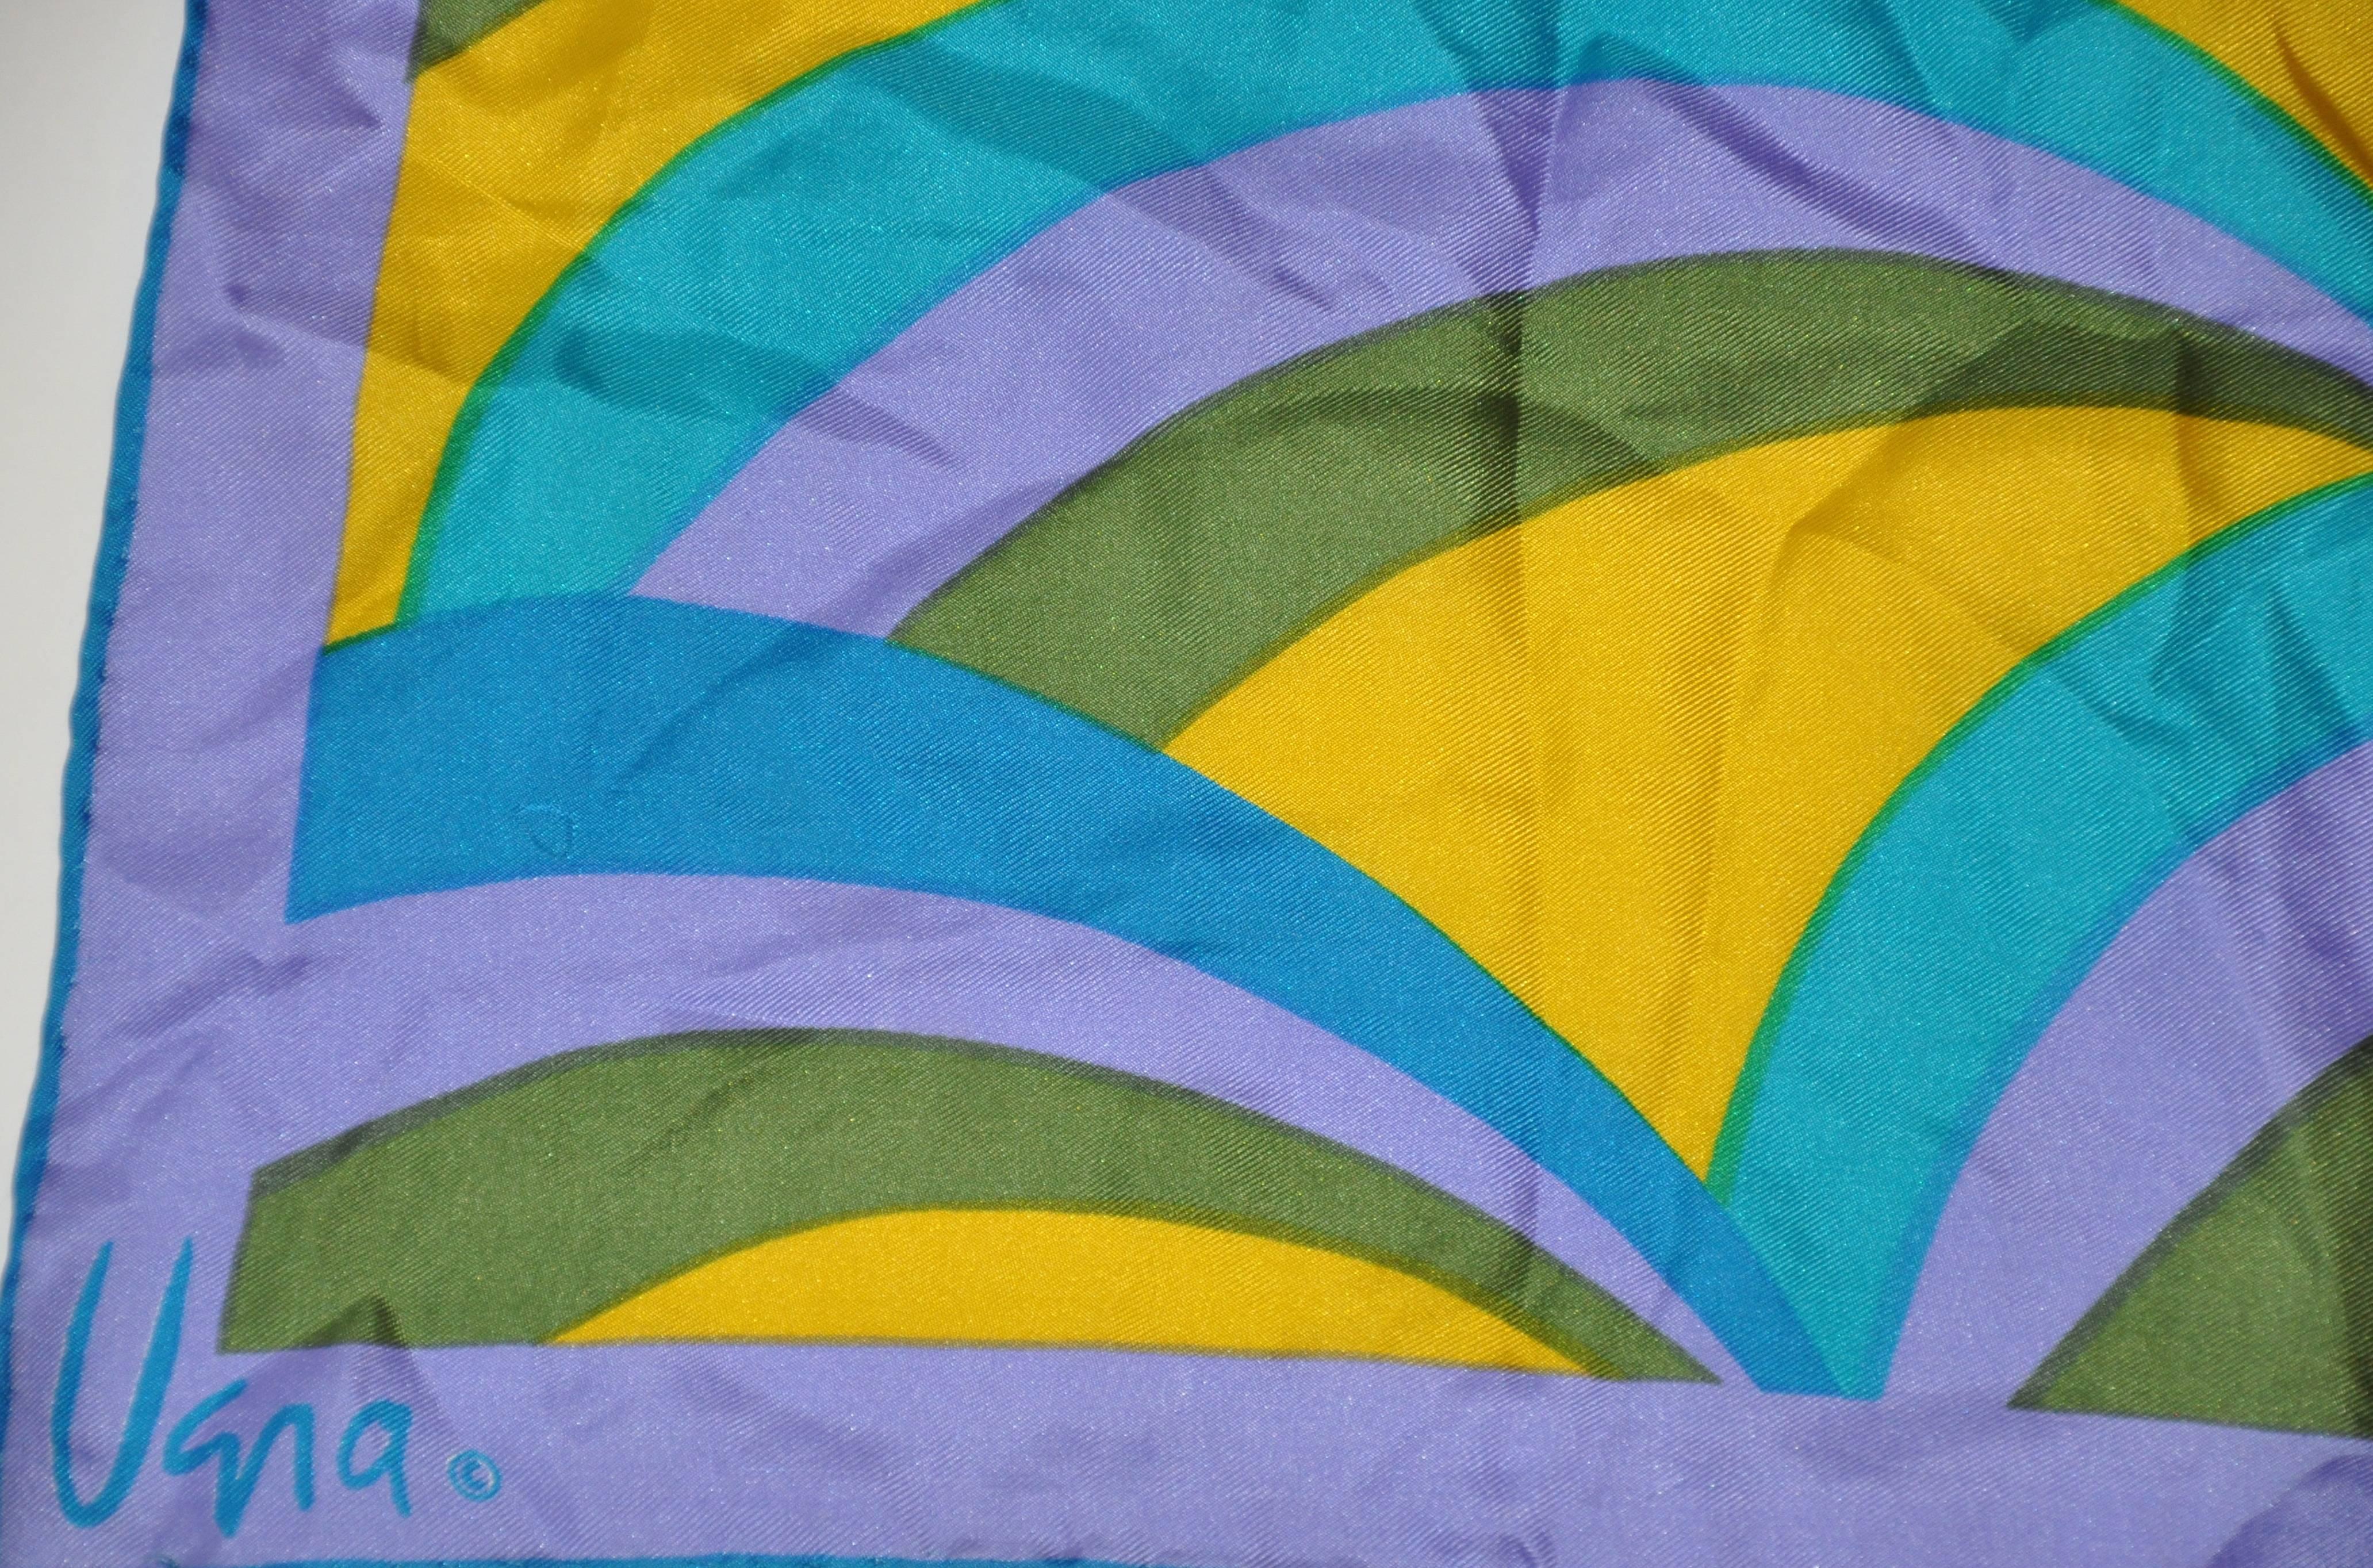 Vera Multi-Lavender, Olive, Yellow & Blue Silk Scarf In Good Condition For Sale In New York, NY